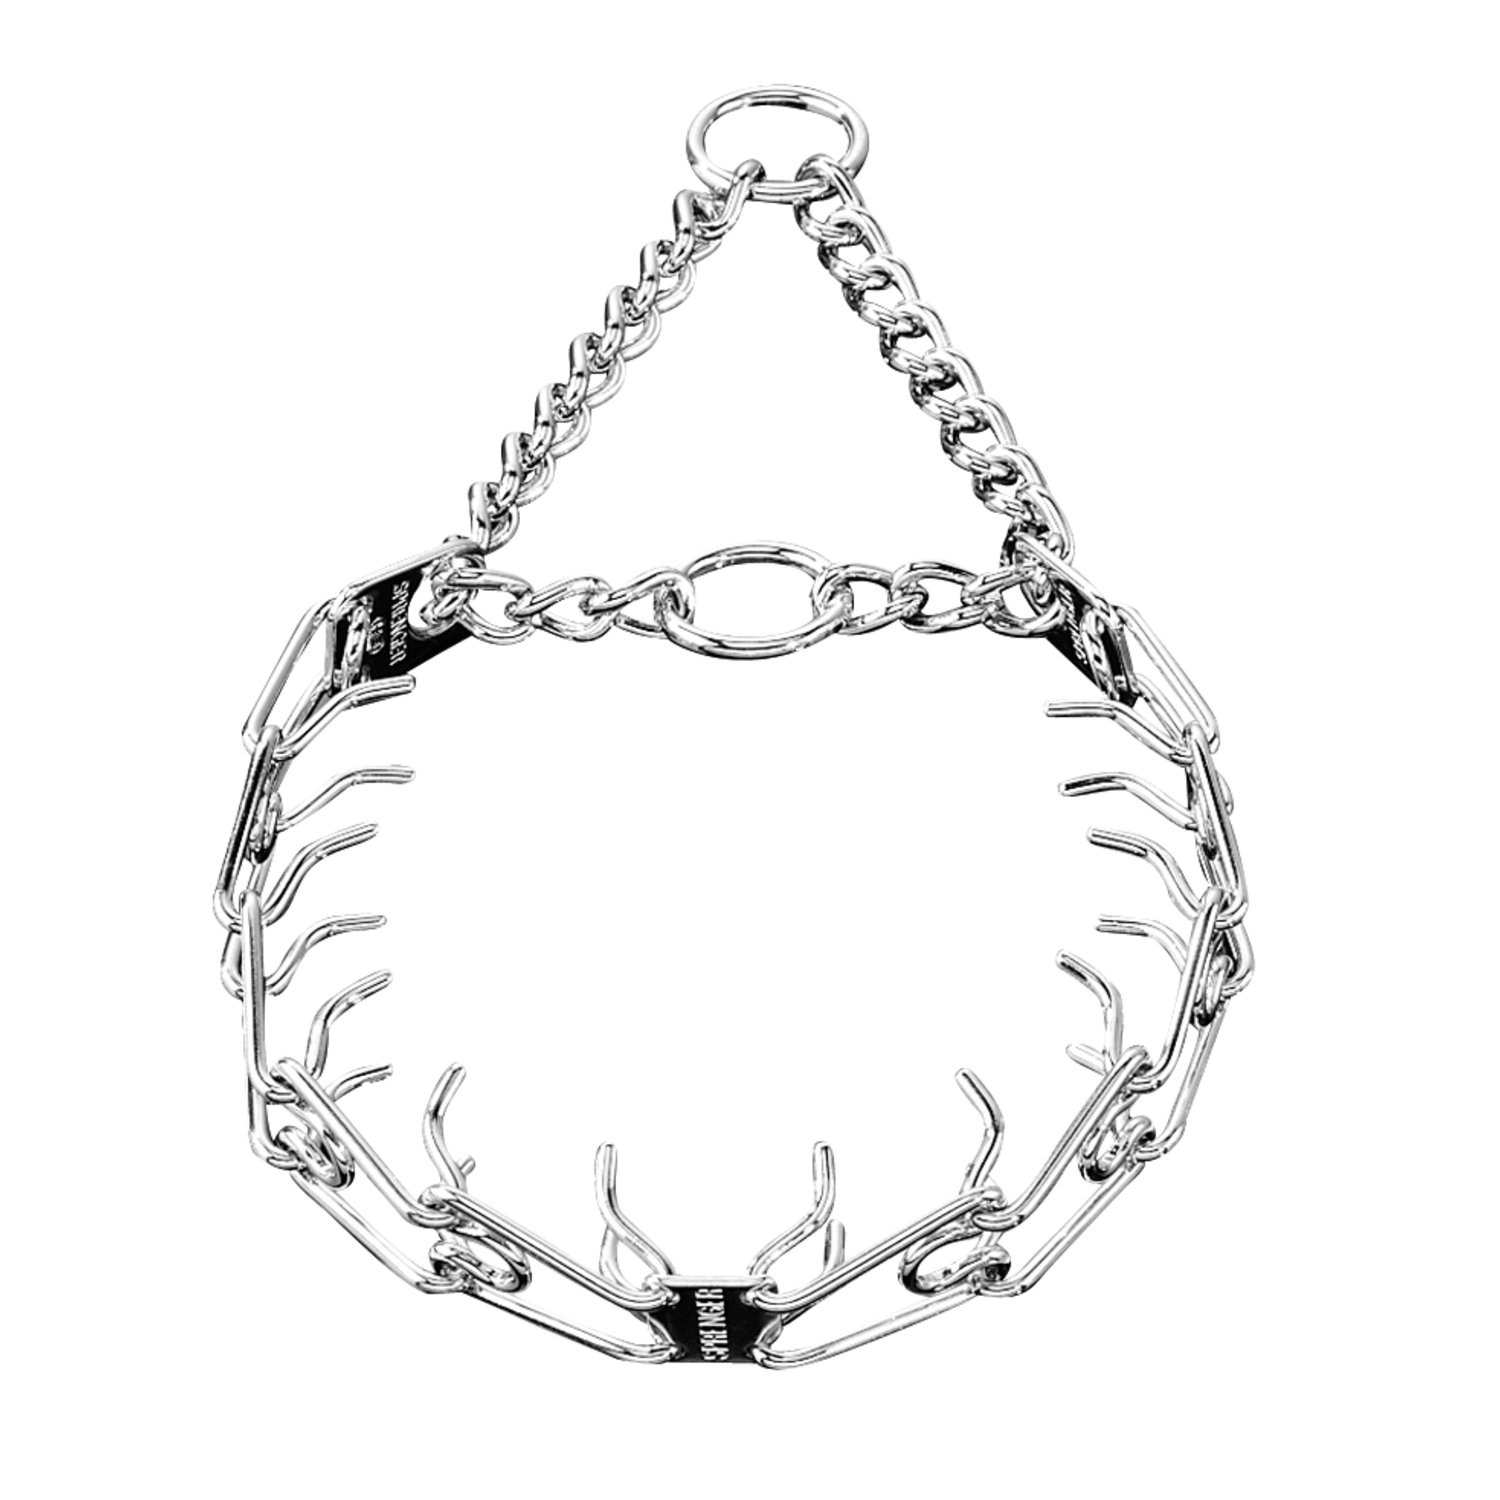 ULTRA-PLUS Training Collar with Center-Plate & Assembly Chain - Steel Chrome-Plated